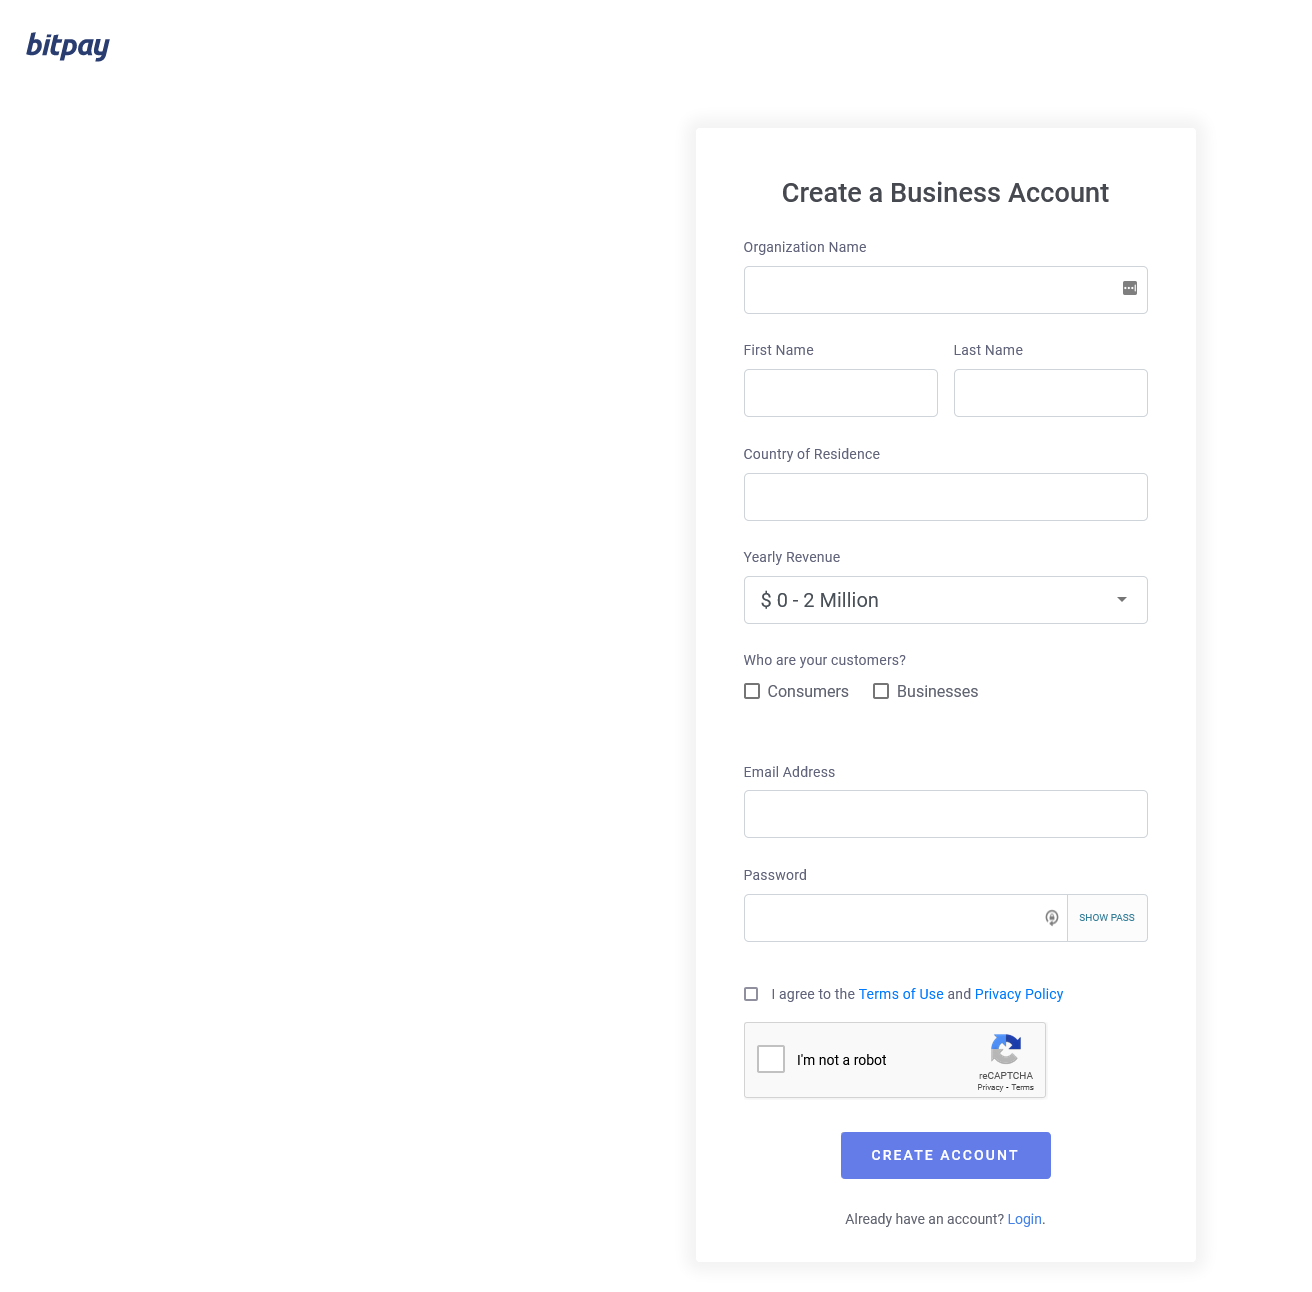 BitPay-Create-Account-shopify